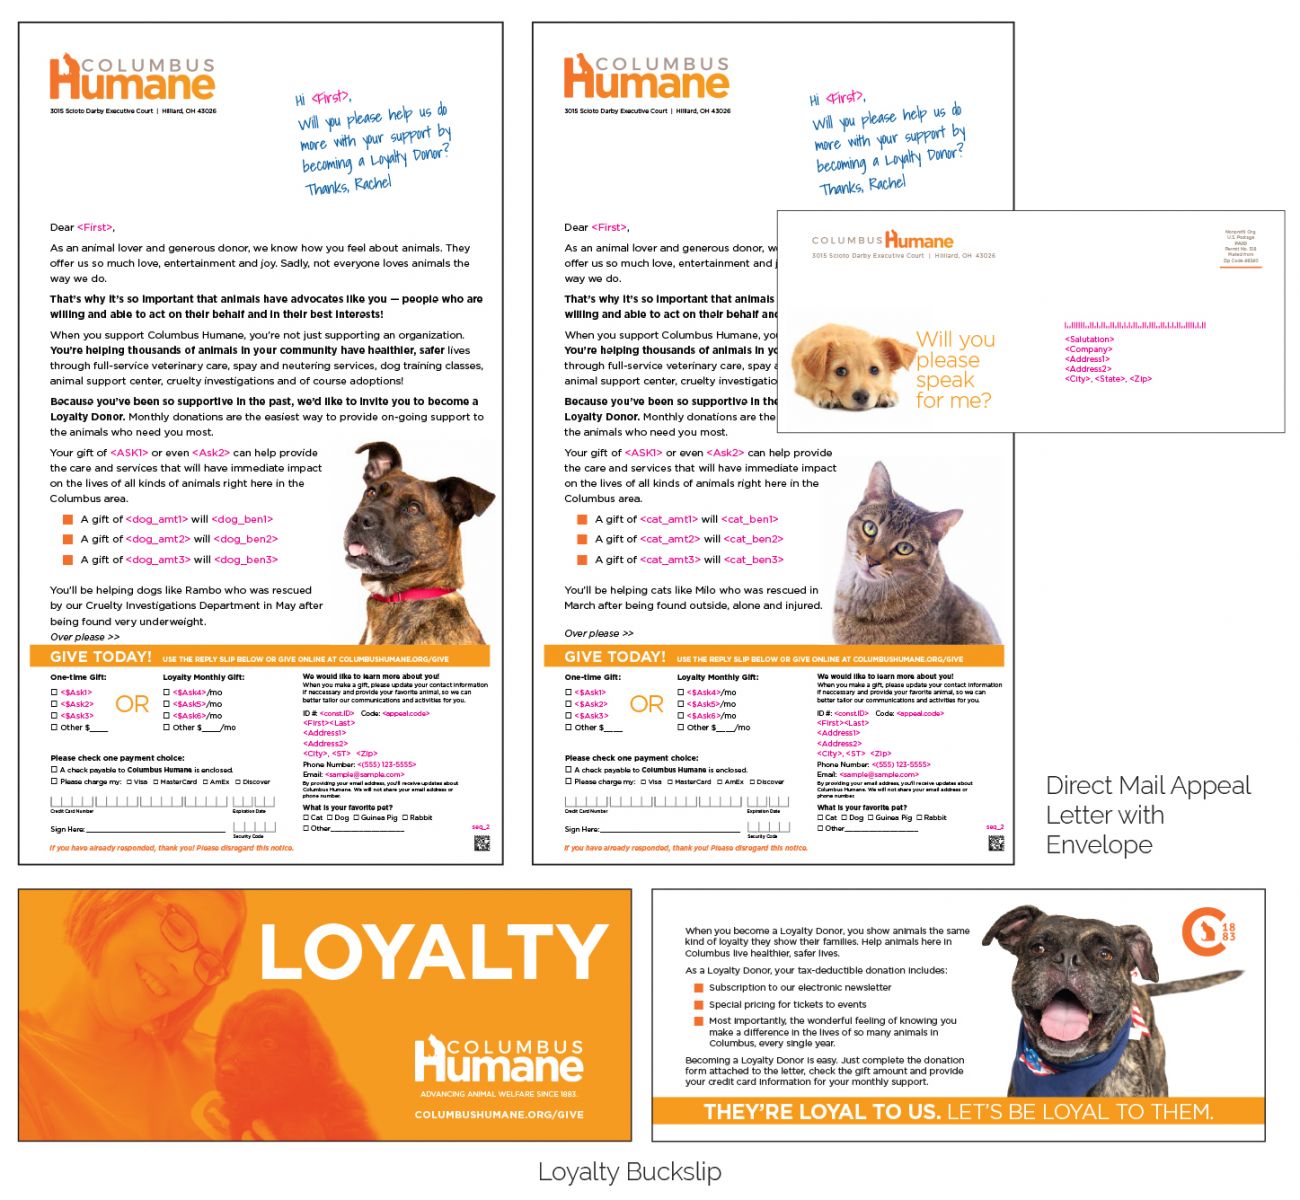 Fundraising appeal letters for the Columbus Humane nonprofit organization